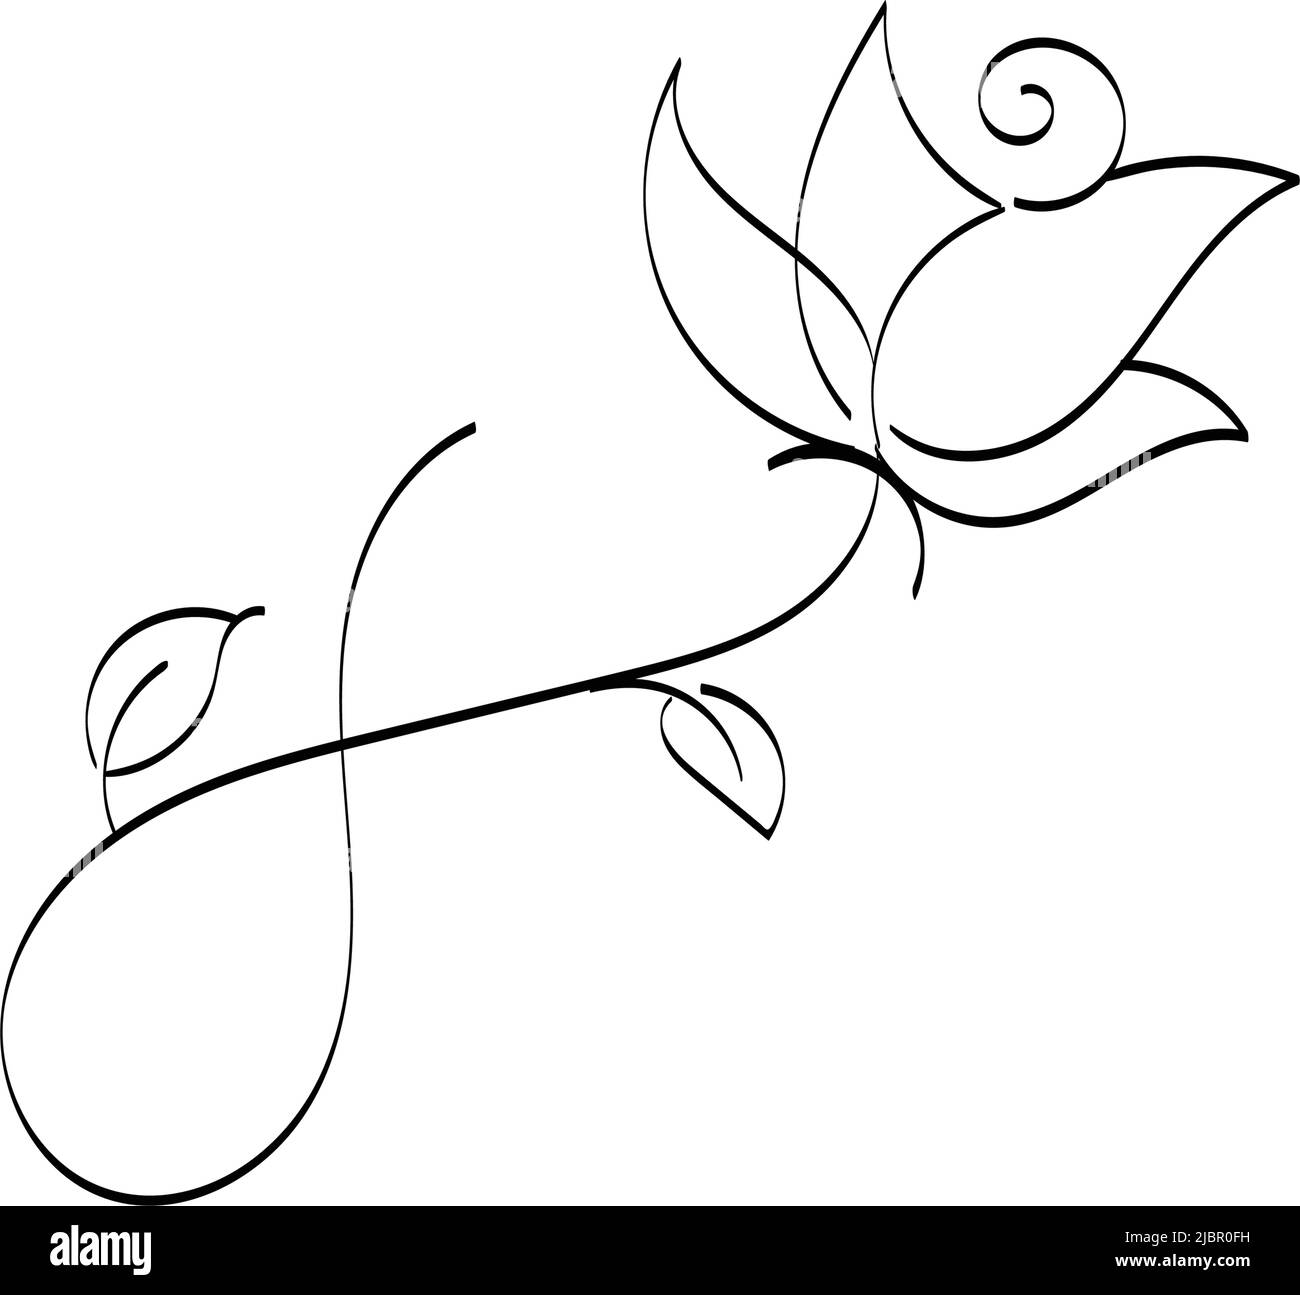 Simple flower tattoo outline. Flower Line Art Drawing for print or use ...